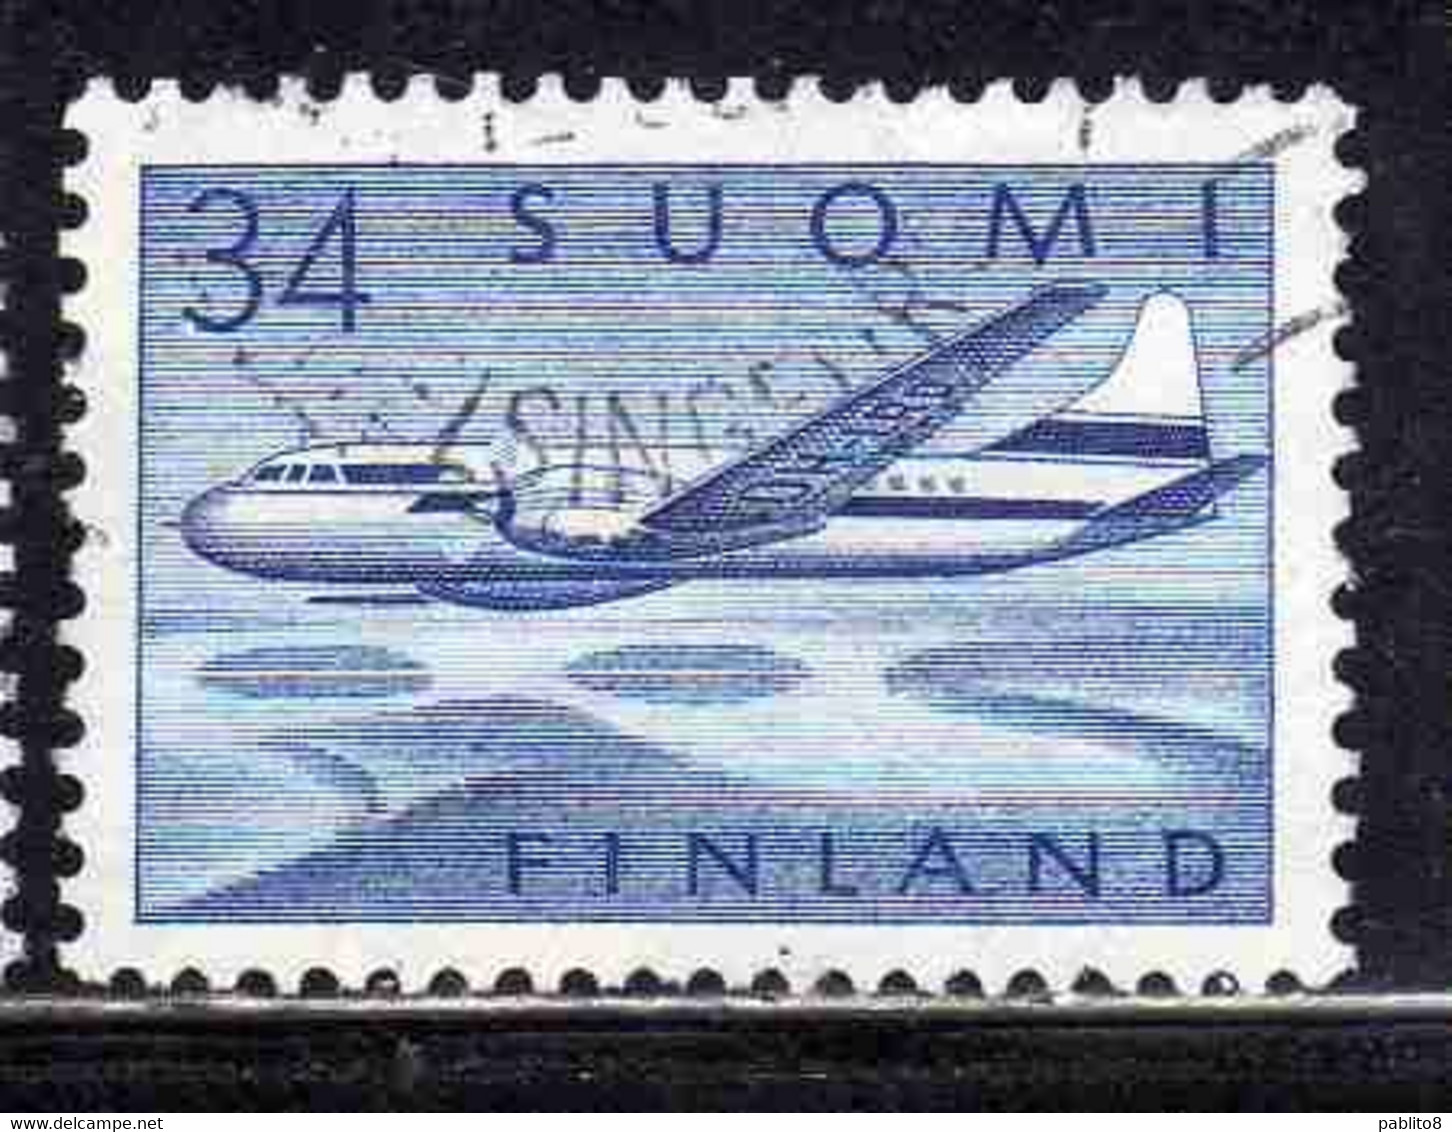 SUOMI FINLAND FINLANDIA FINLANDE 1958 AIR POST MAIL AIRMAIL CONVAIR OVER LAKES 34m USED USATO OBLITERE' - Used Stamps